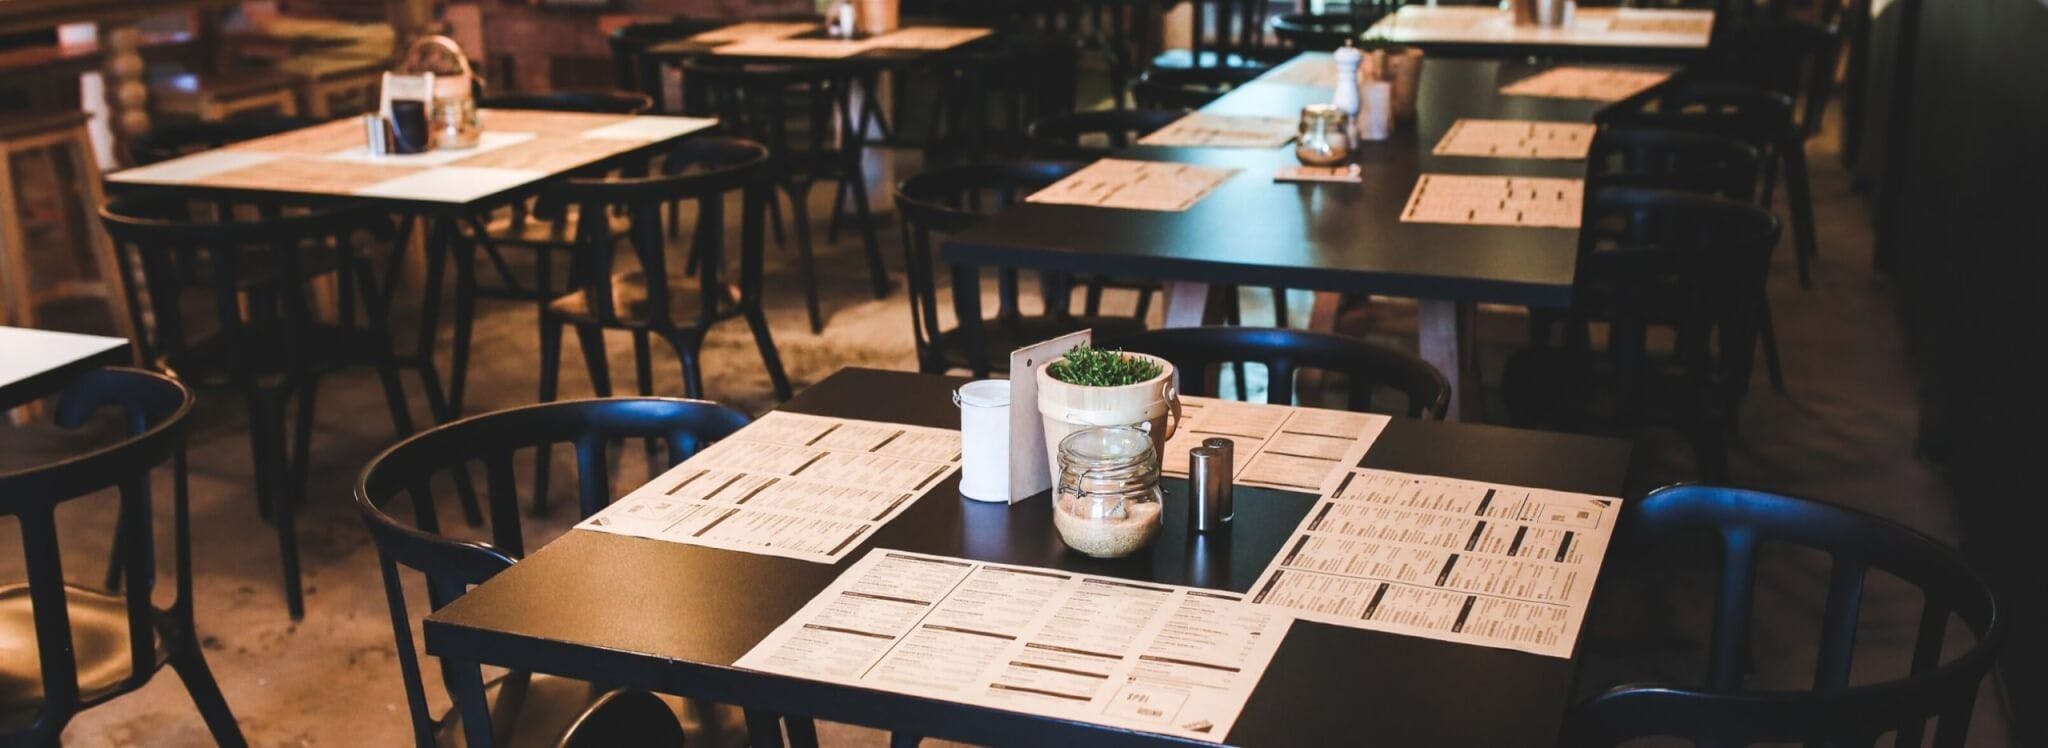 restaurant table with menus